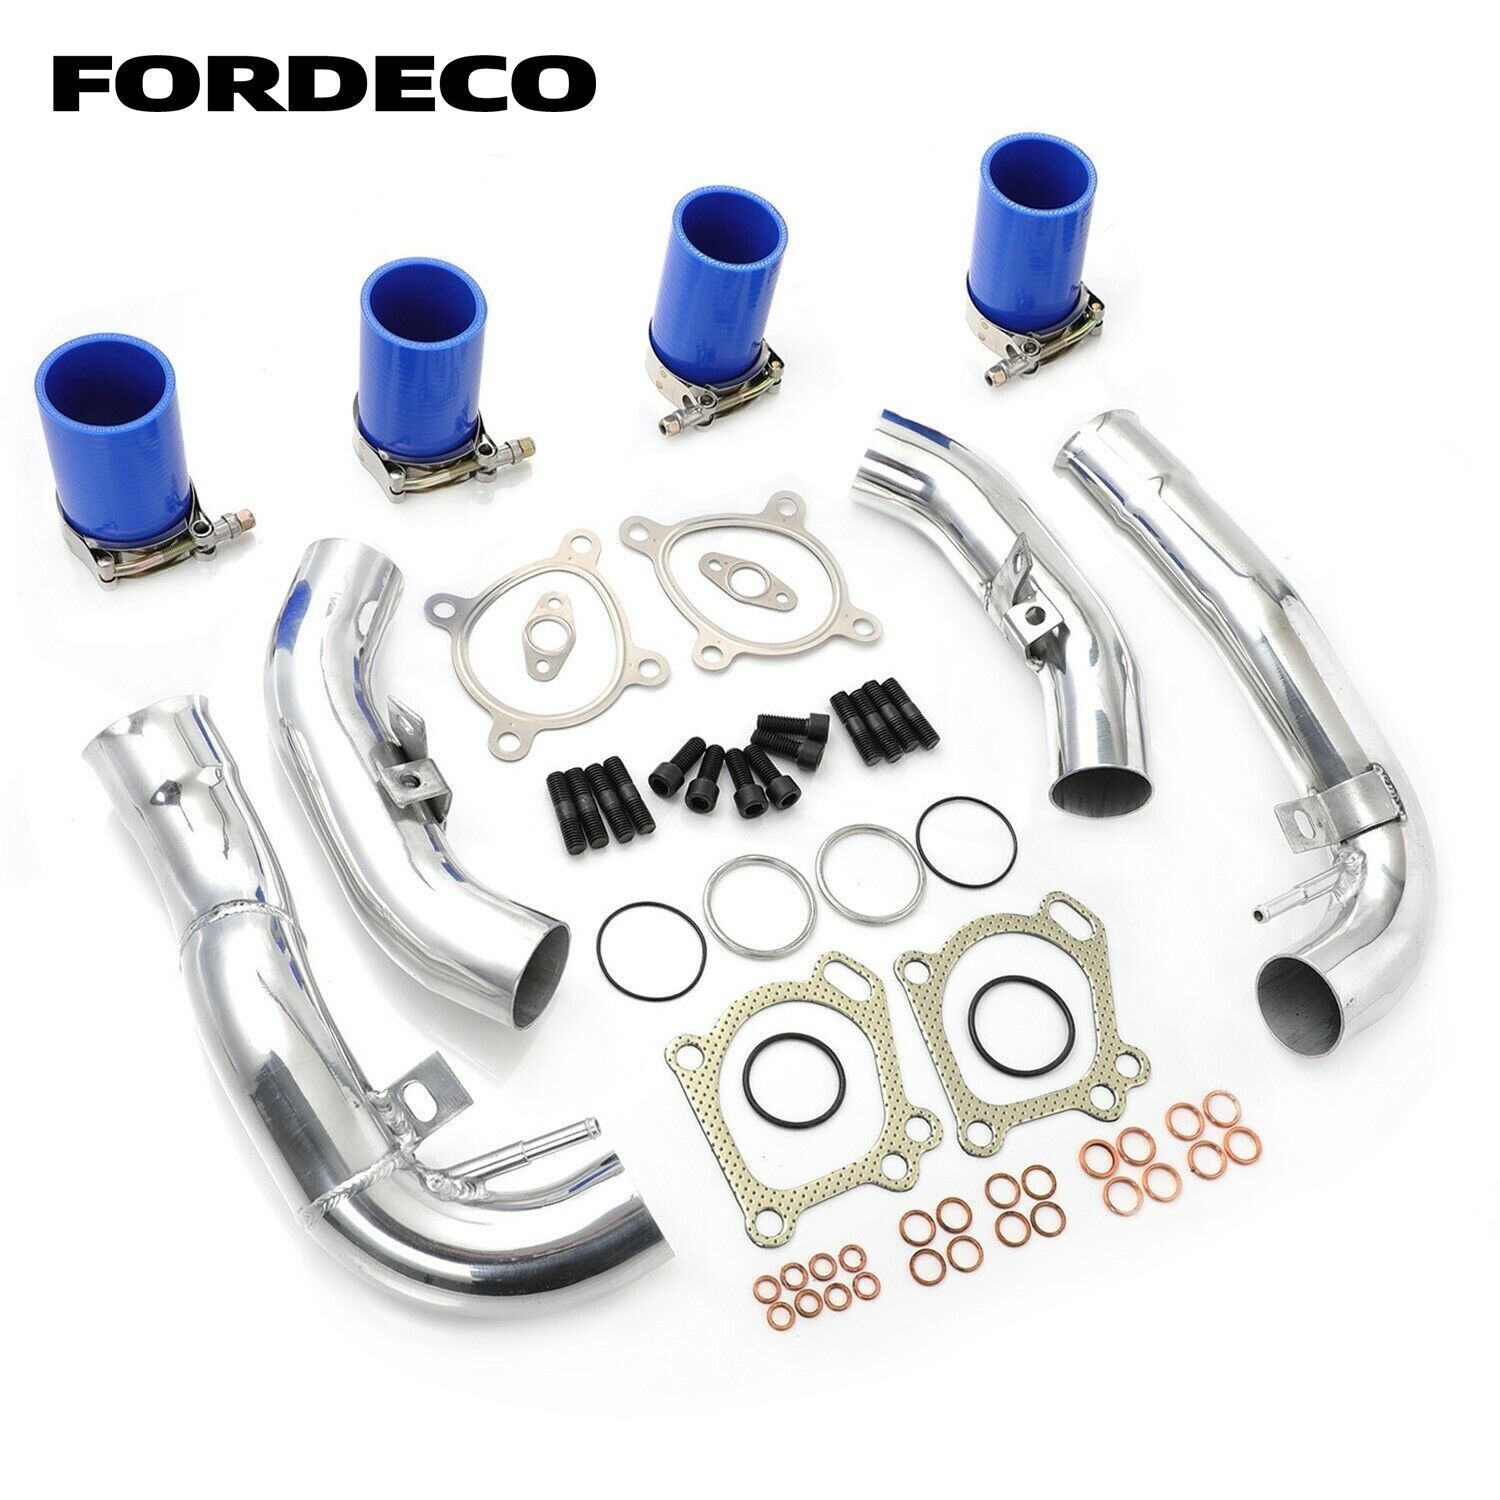 Turbo Inlet Pipes kit for 00-05 Audi RS4 S4 Avant B5 A6 Allroad Quattro K04 2.7L